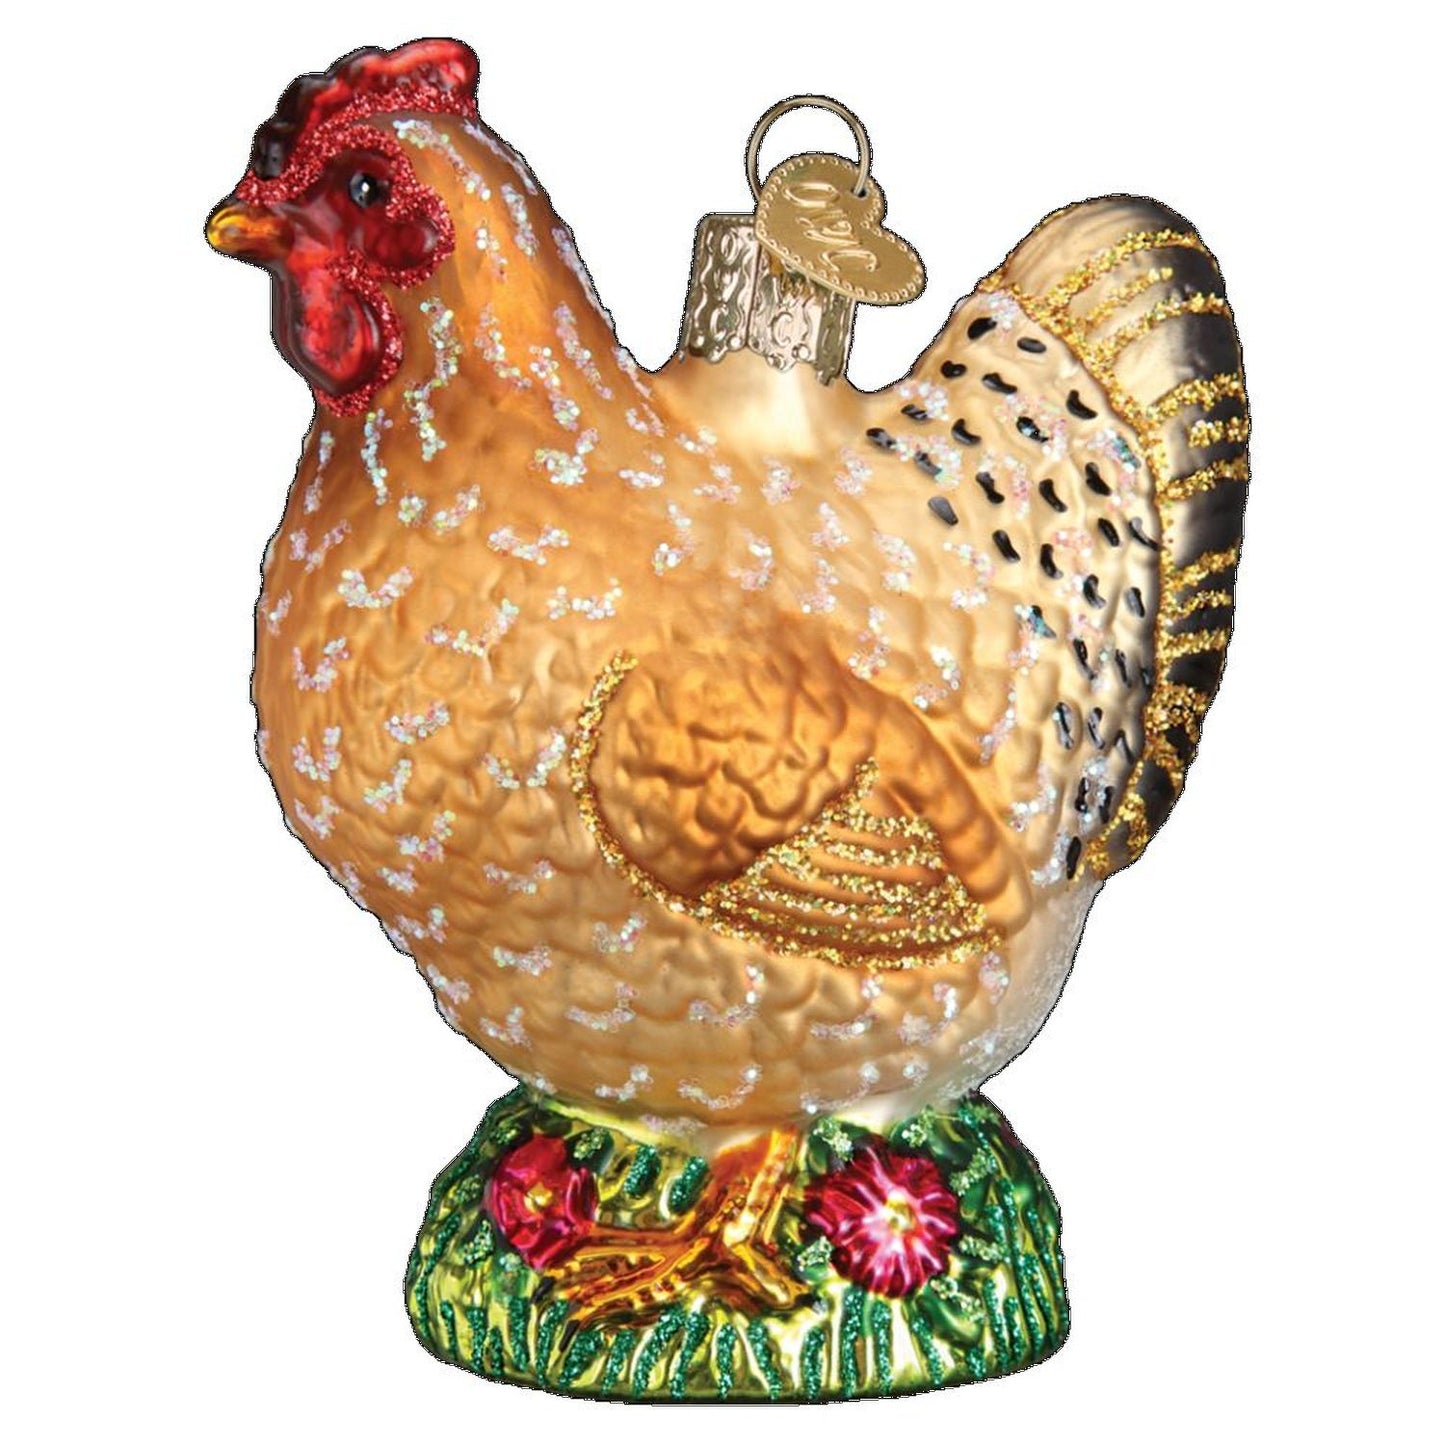 Old World Christmas Spring Chicken Ornament.